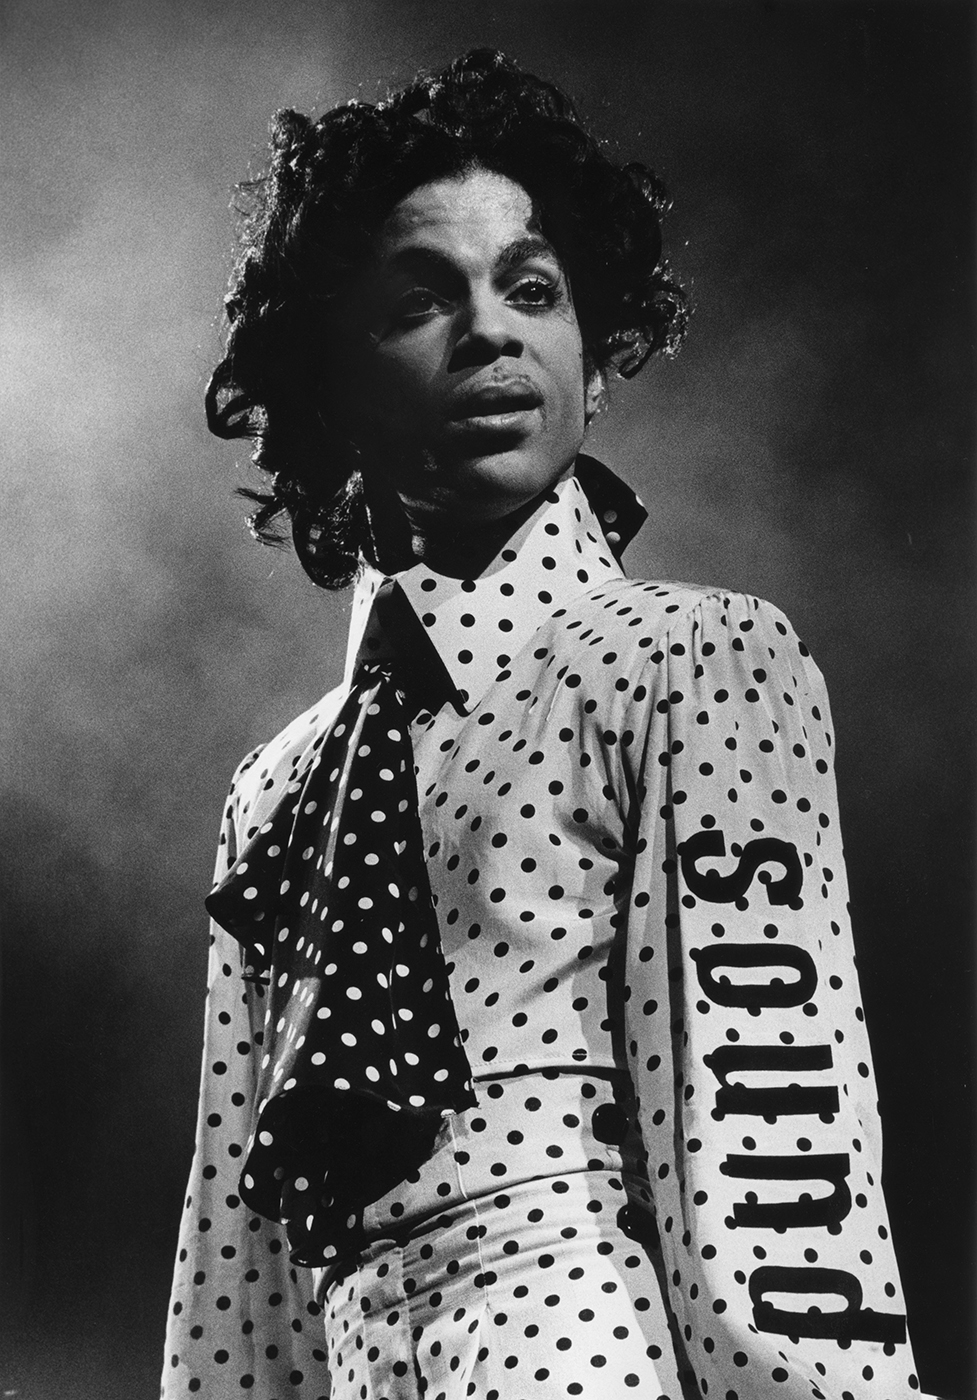 Photography of Prince Rogers Nelson. Image courtesy of the Richmond Times-Dispatch.